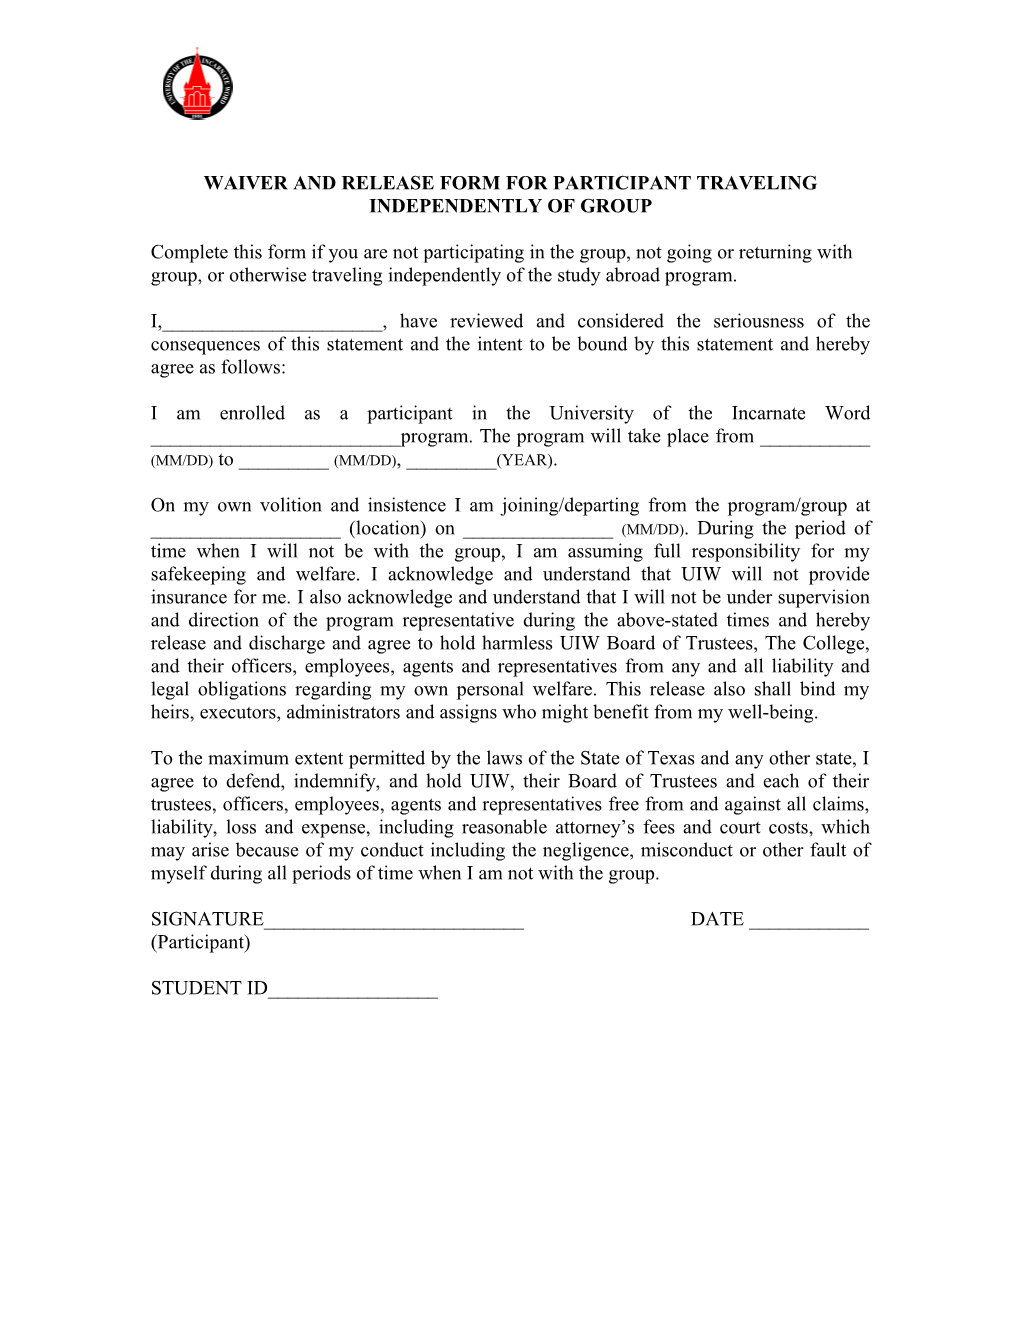 Waiver and Release Form for Participant Traveling